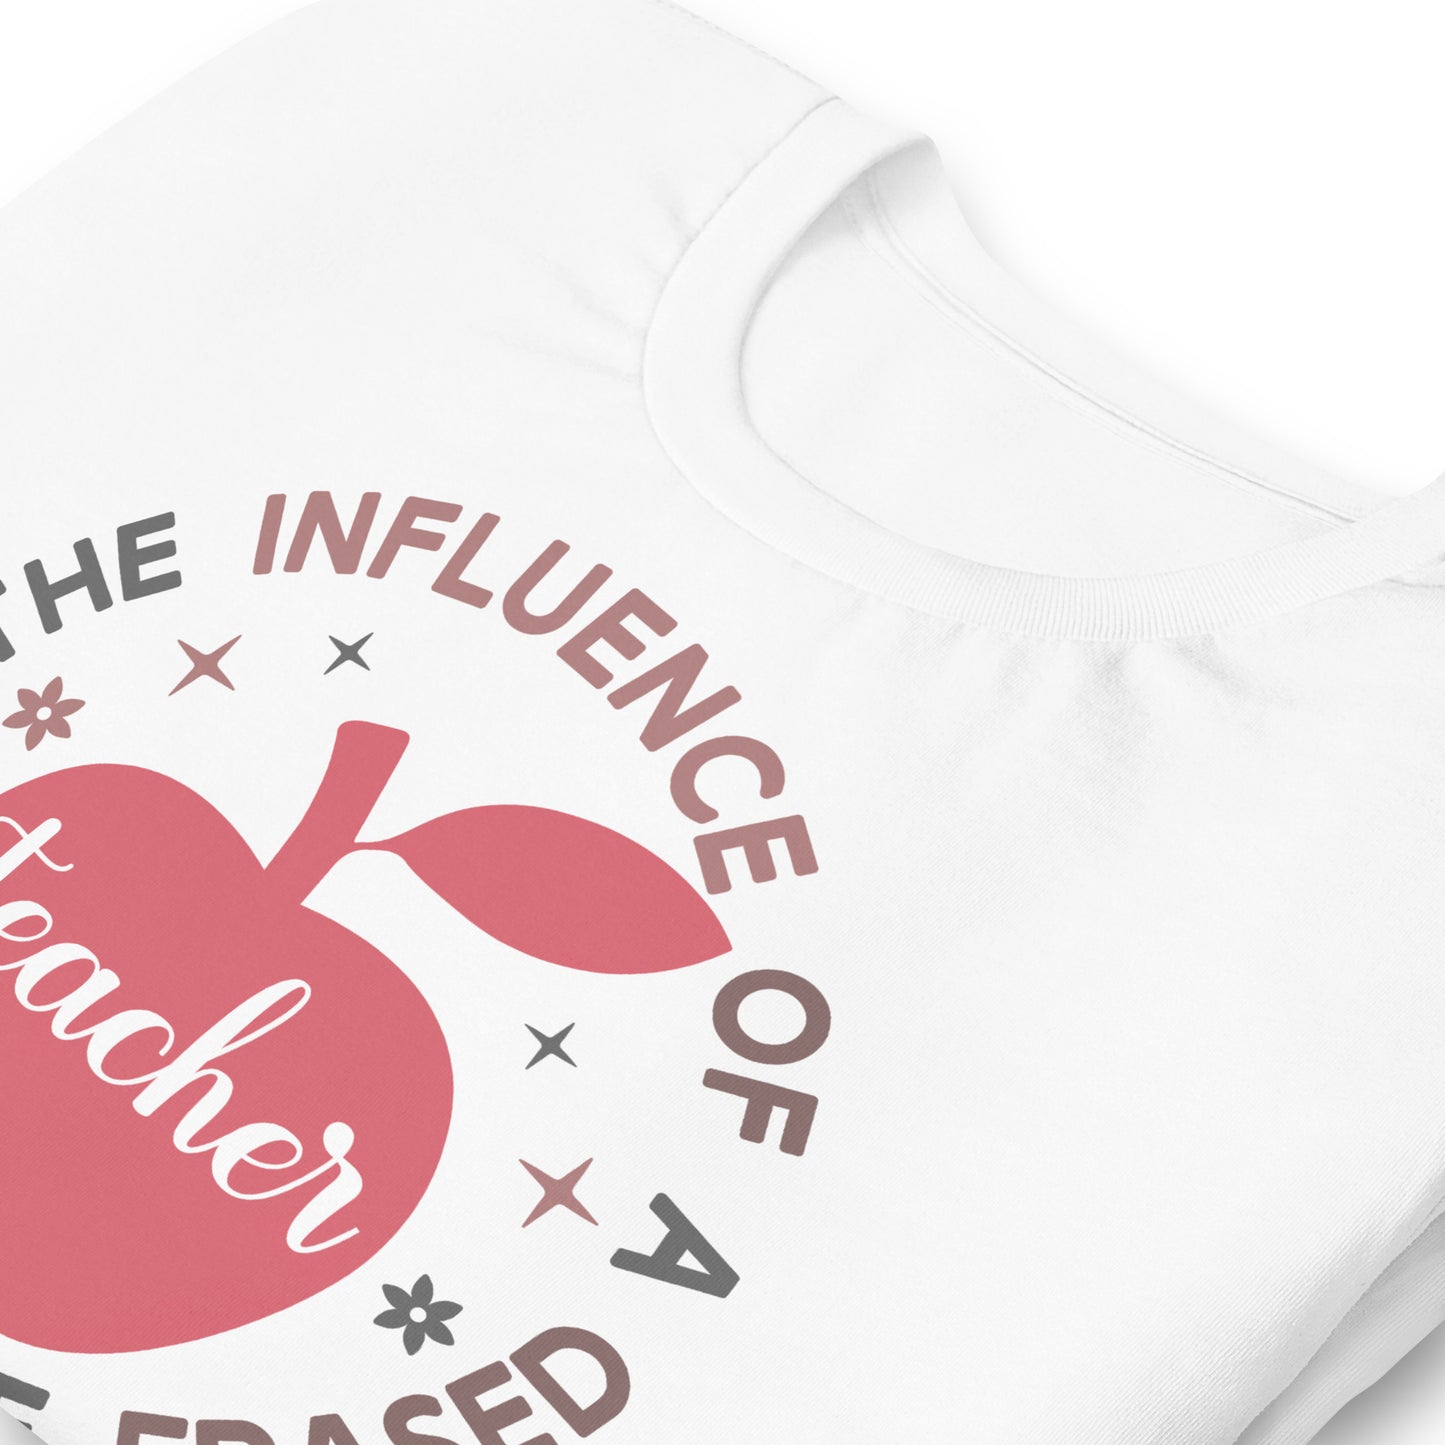 The Influence of a Teacher Can Never Be Erased Bella Canvas Unisex T-Shirt